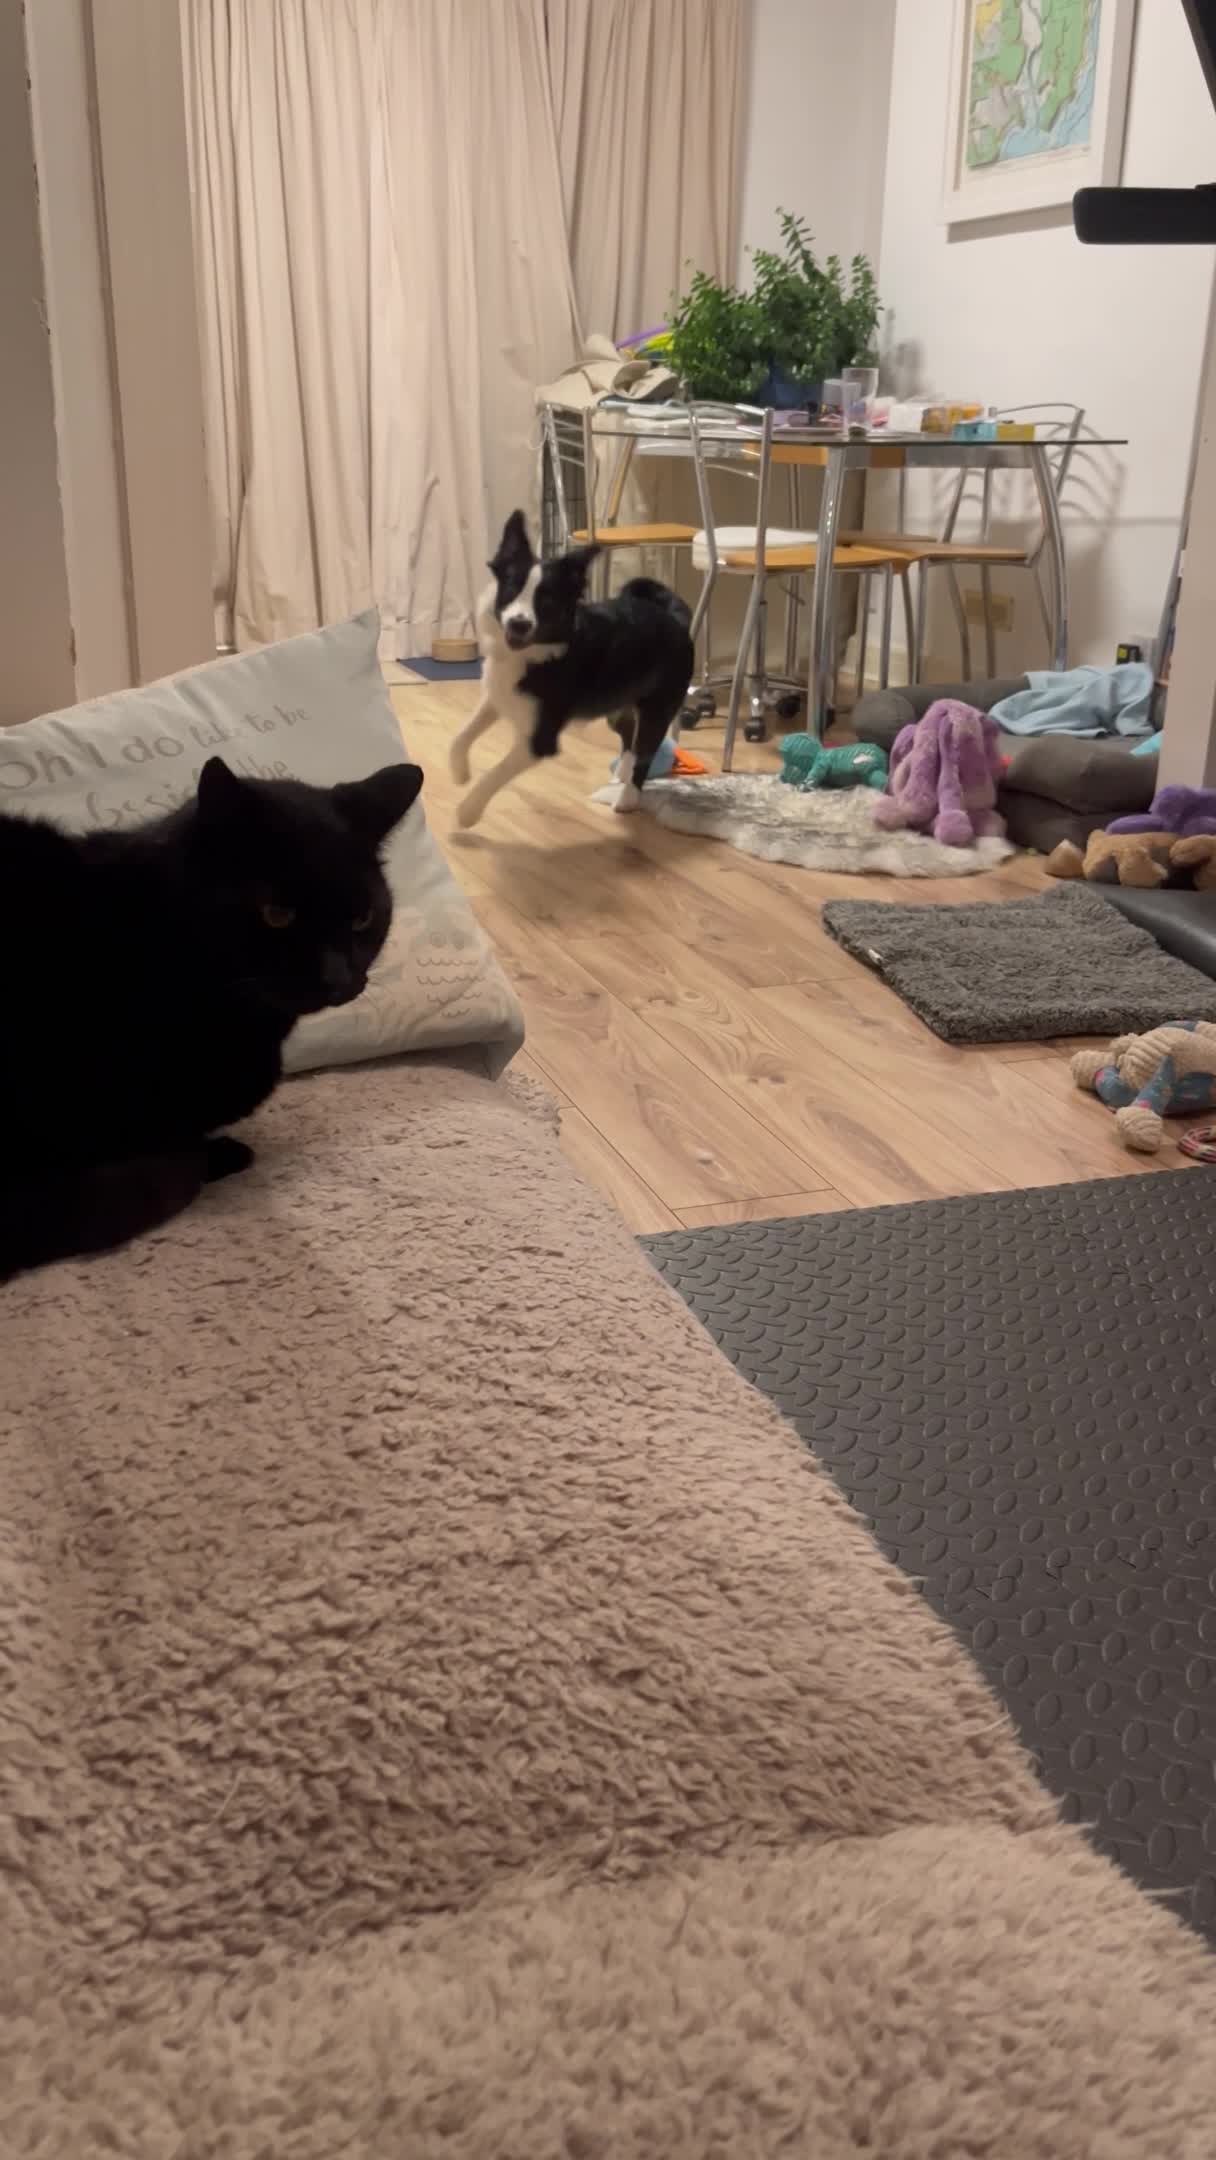 Border Collie Puppy Tries to Play With Elderly Cat